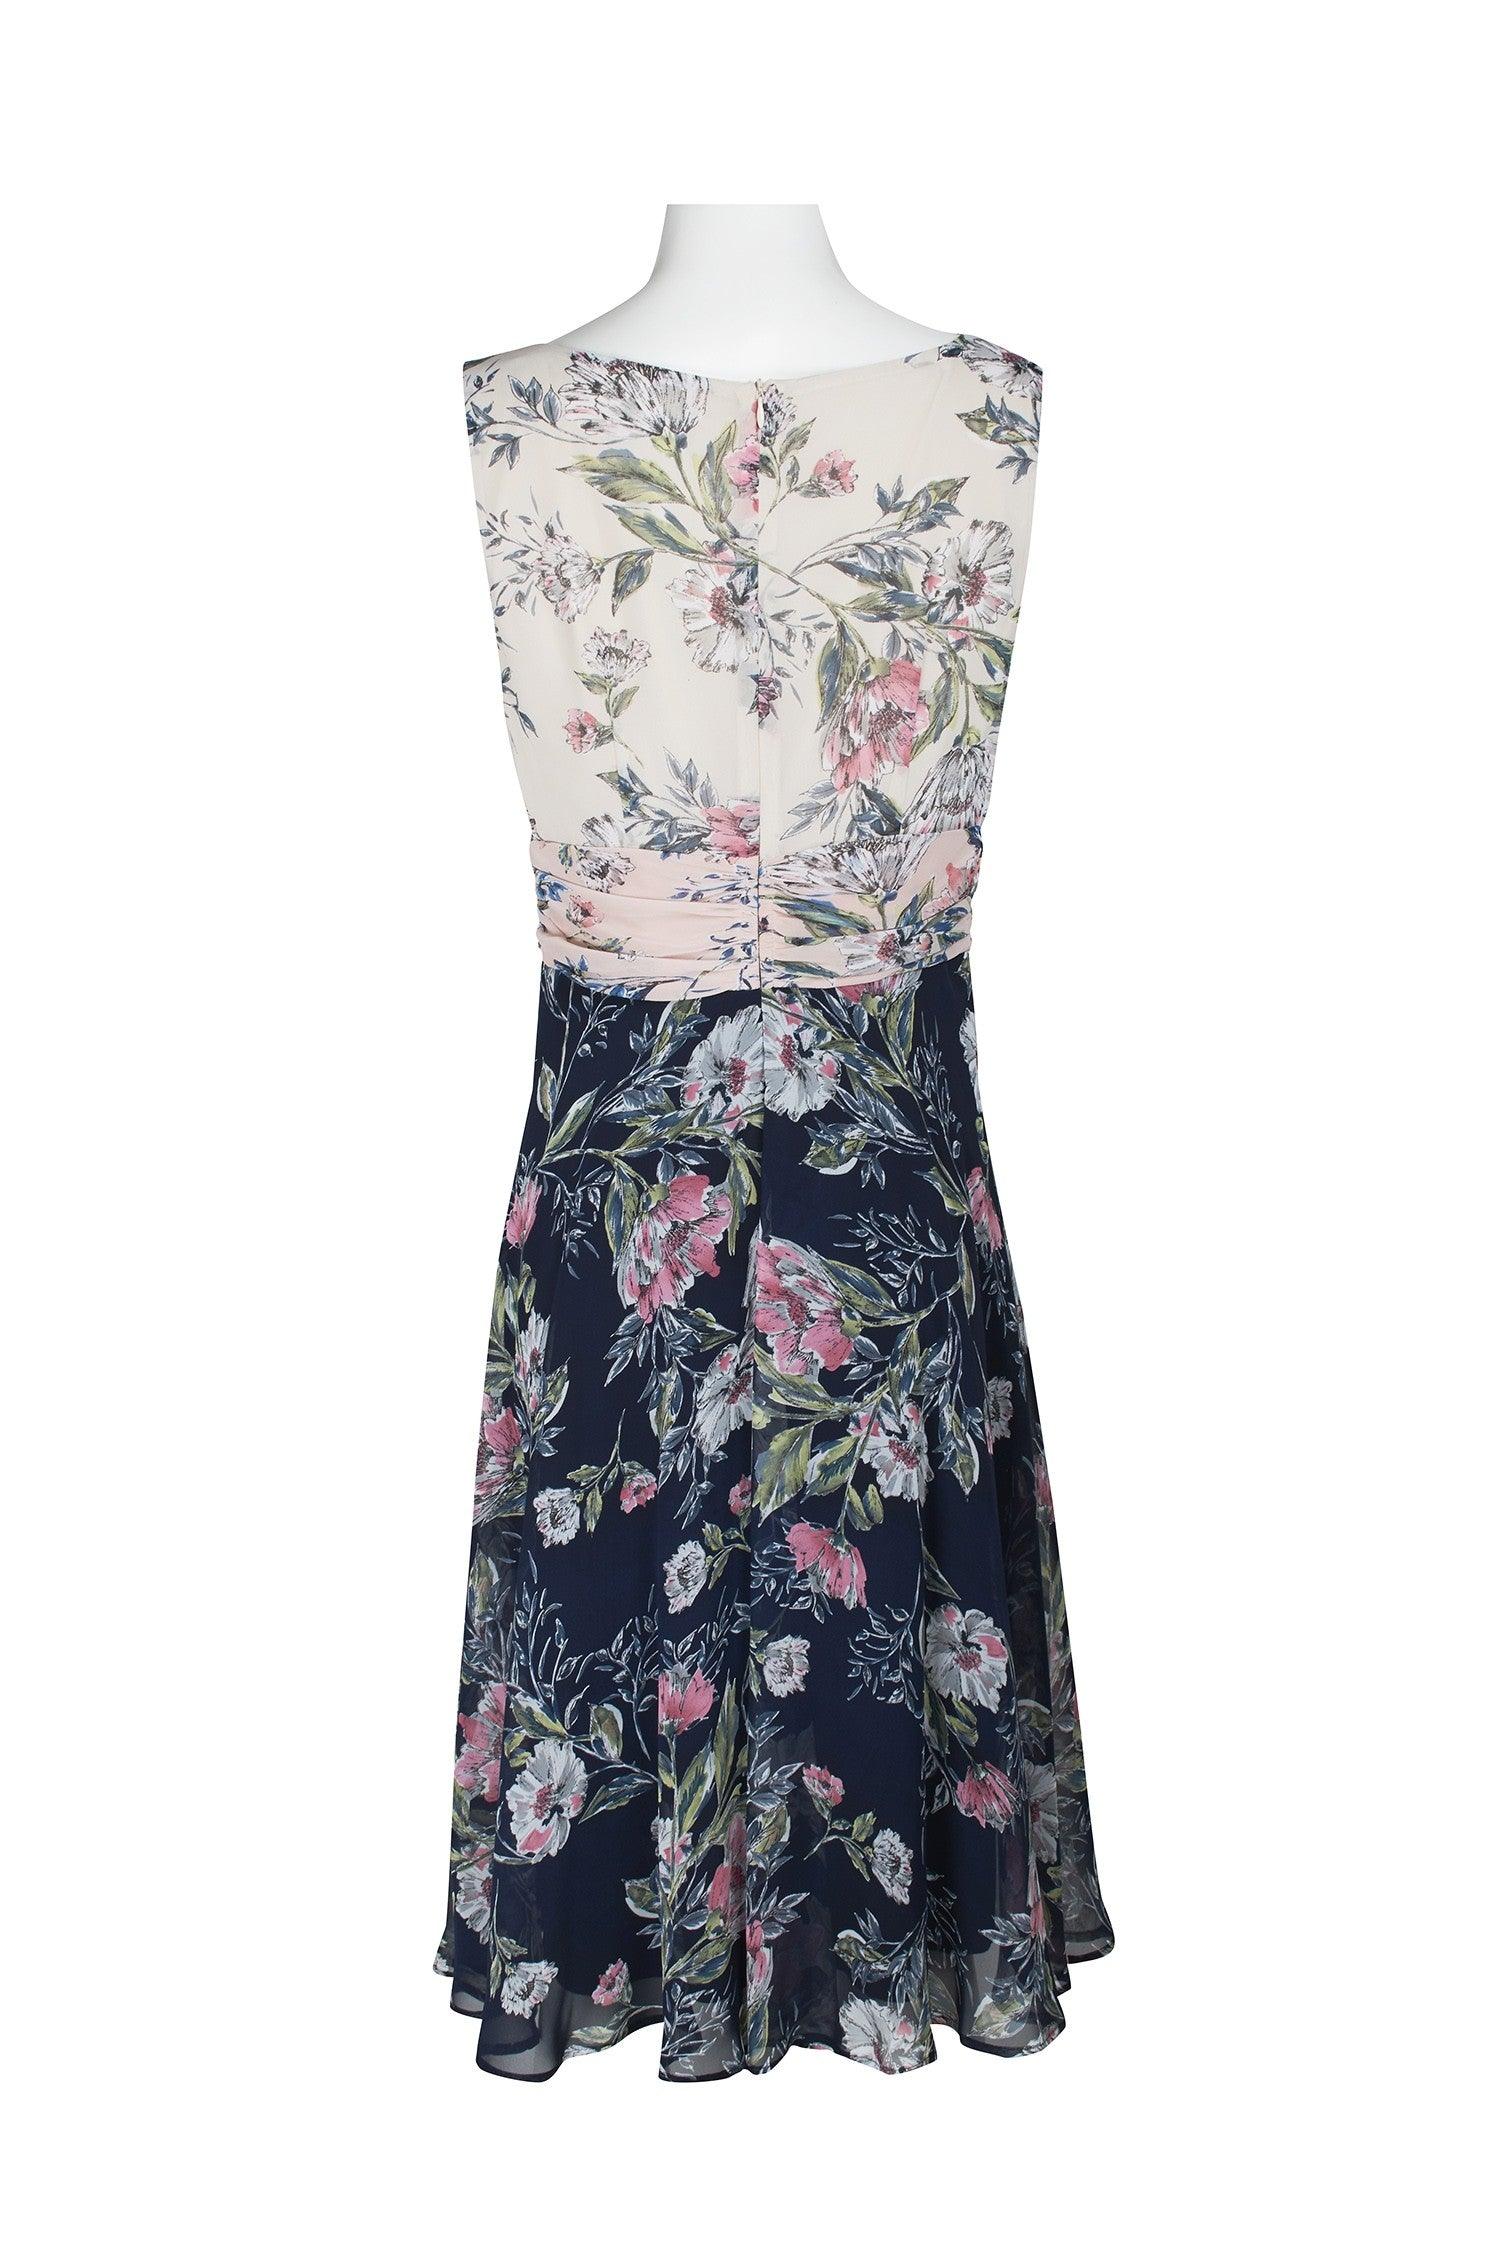 Connected Apparel Floral Print Chiffon Short Dress - The Dress Outlet